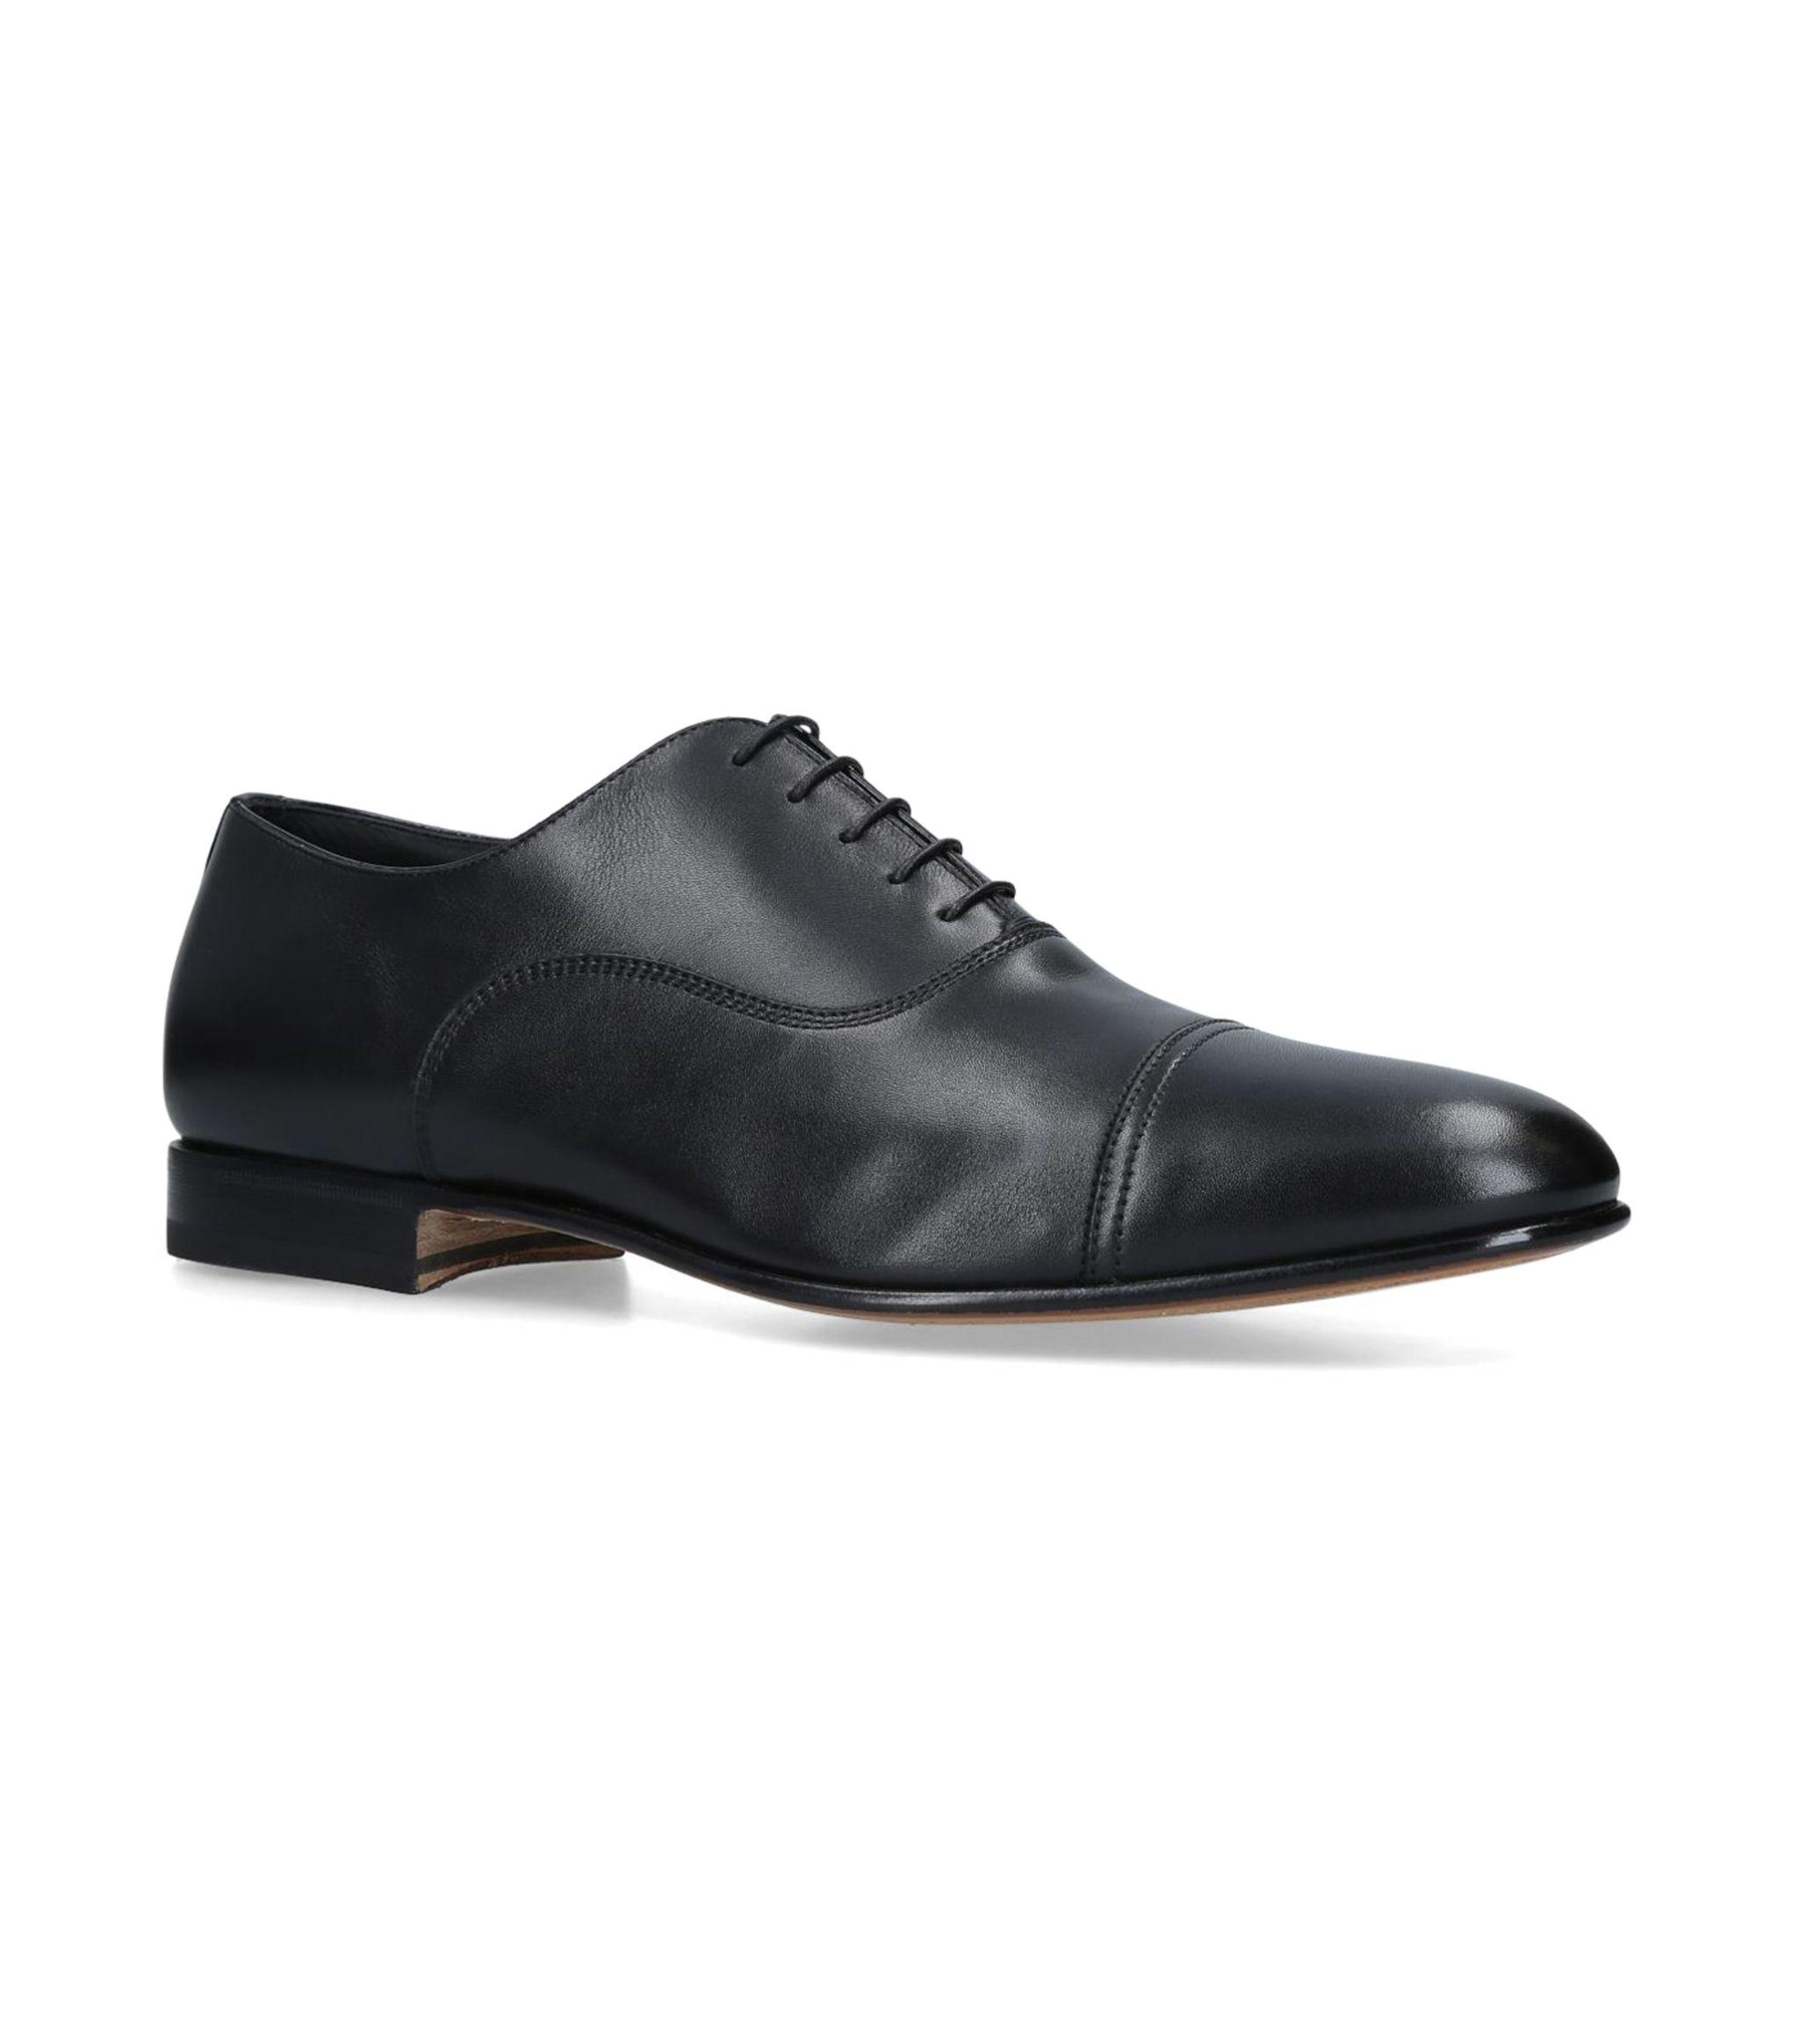 Santoni Leather Kenneth Oxford Shoes in Black for Men - Save 7% - Lyst